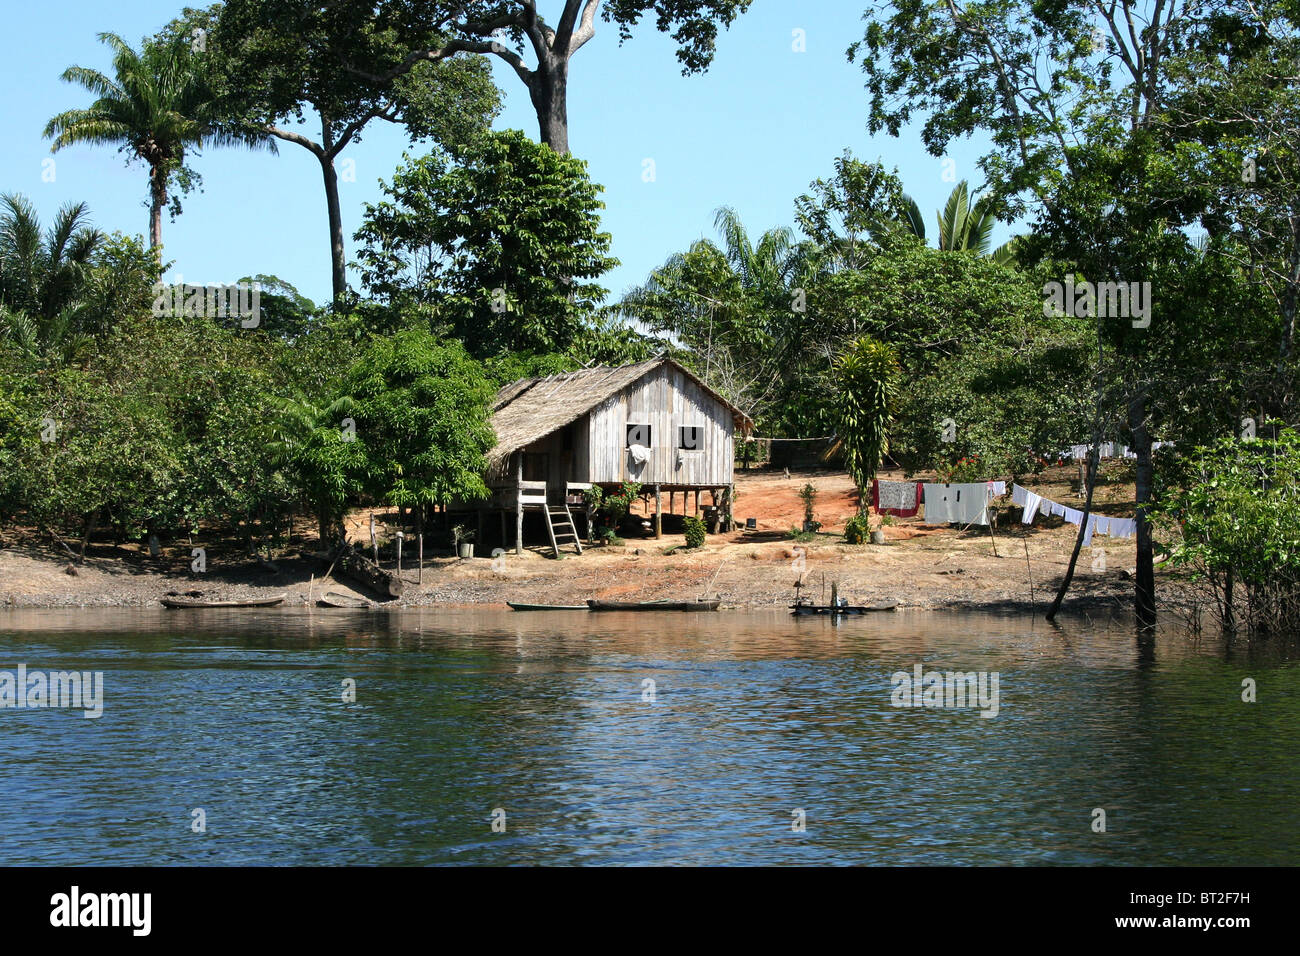 Wooden house by Amazon River, Brazil Stock Photo